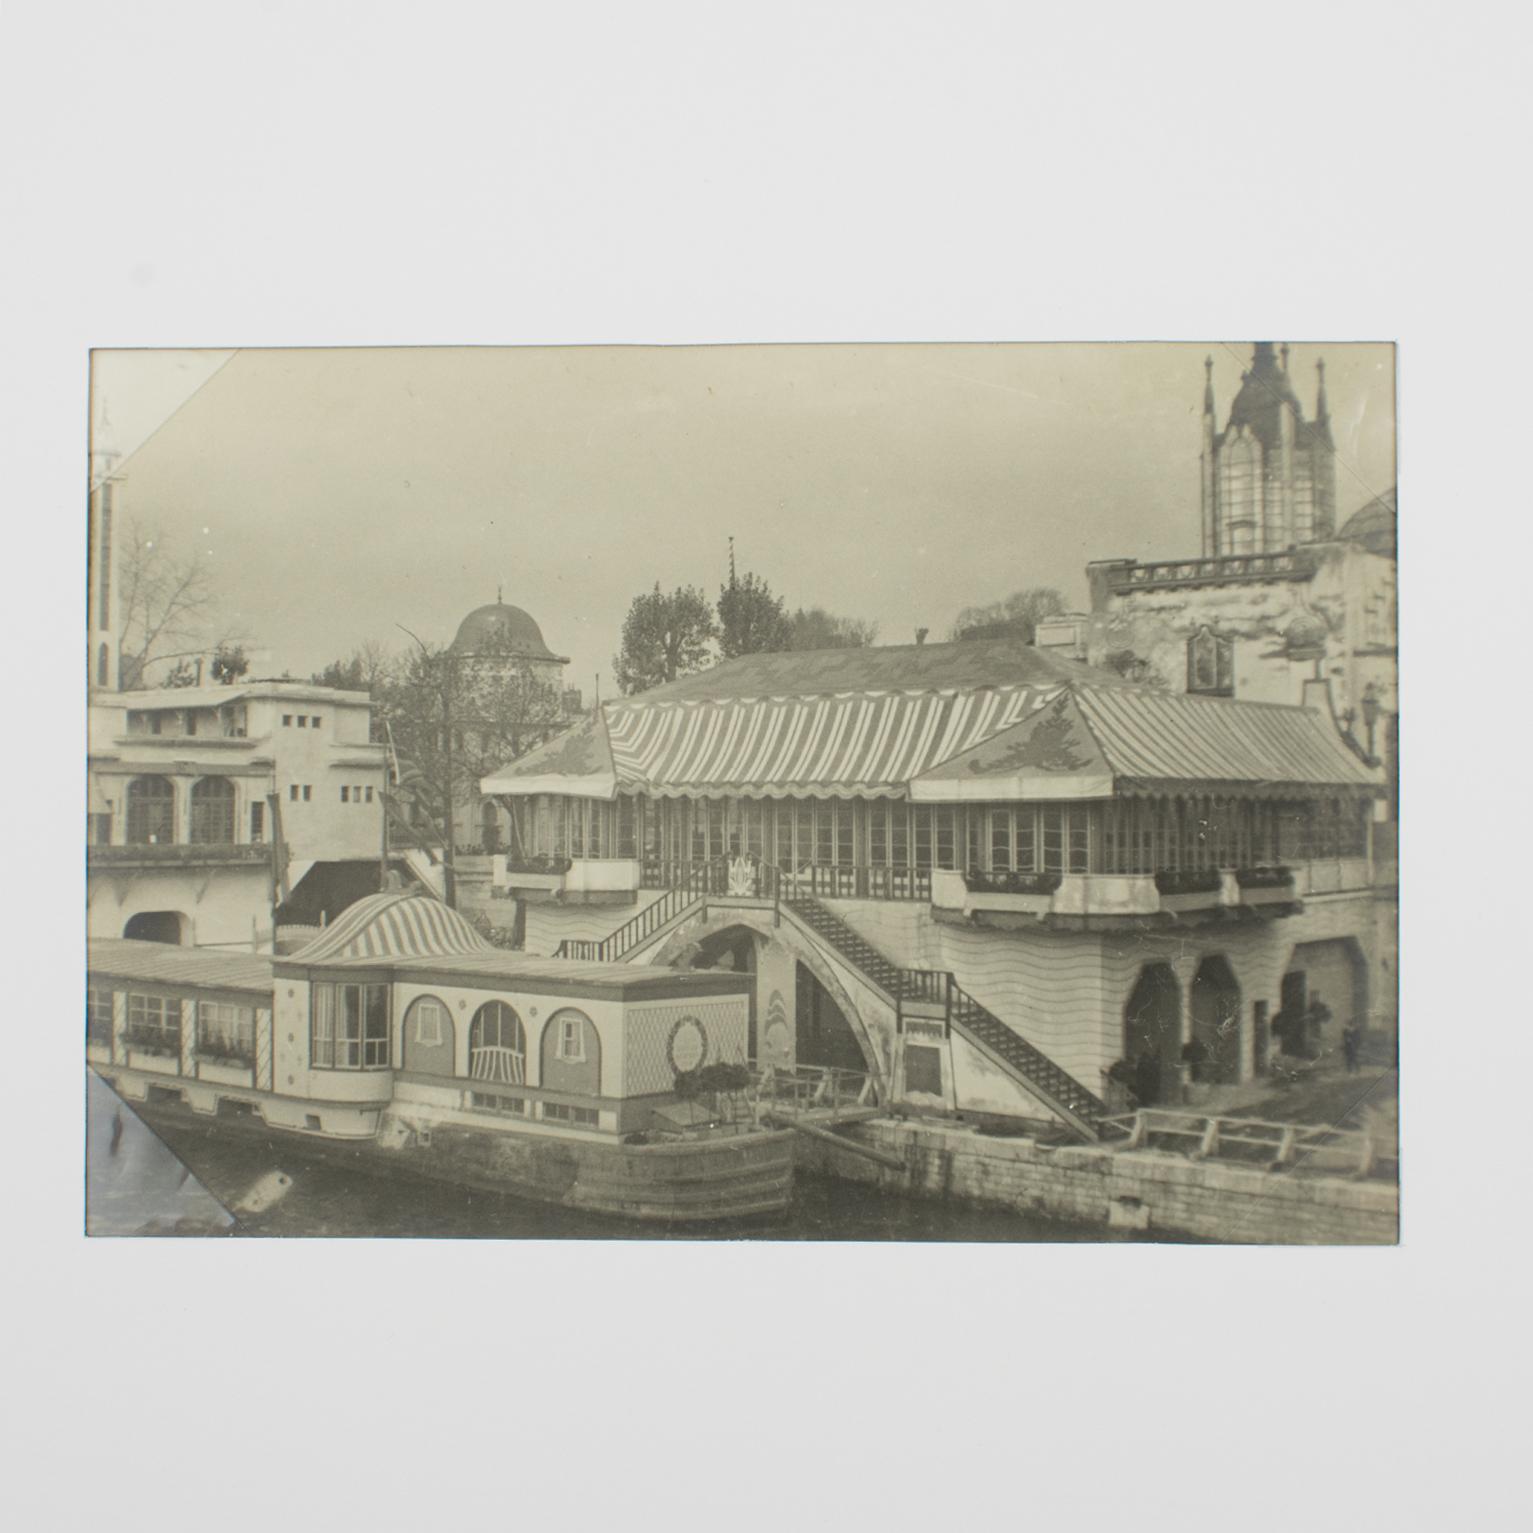 A unique original silver gelatin black and white photograph by Press Agency, Paris 1925.
International Decorative Arts Exhibition in Paris, 1925, a view from the River Seine.
Features:
Original silver gelatin print photography unframed.
Press